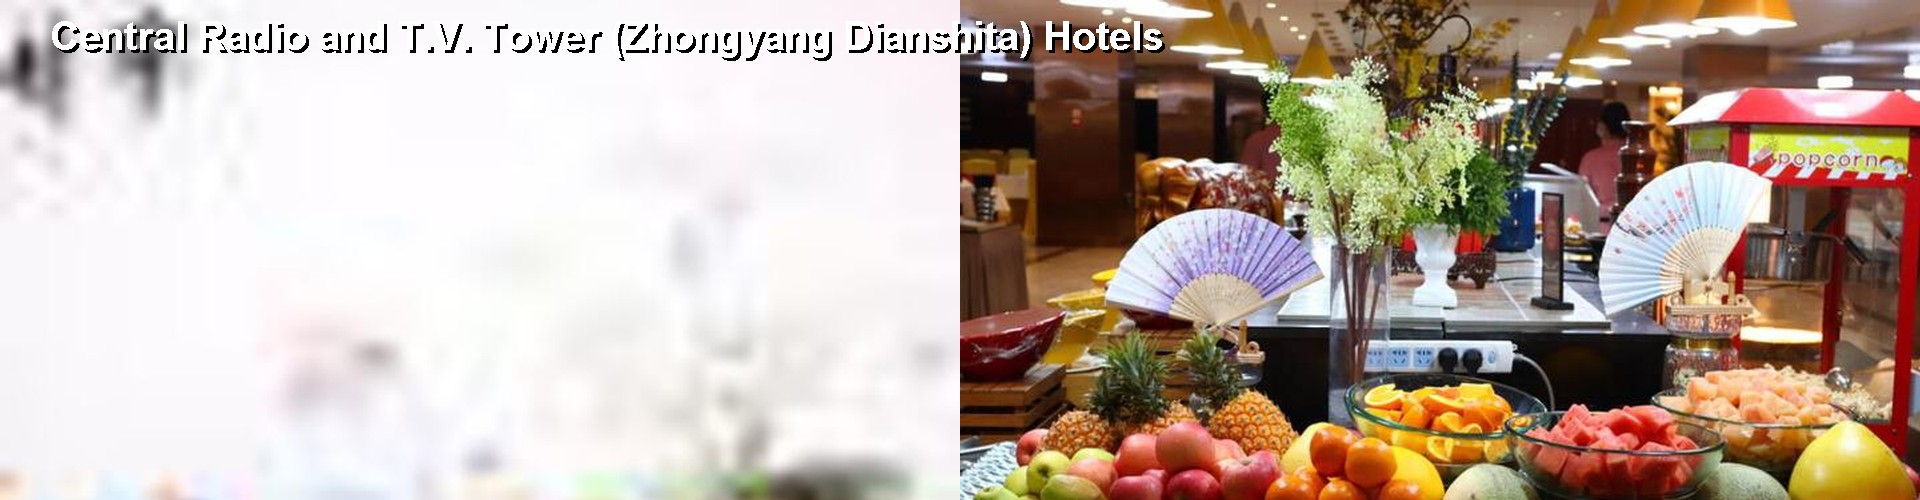 4 Best Hotels near Central Radio and T.V. Tower (Zhongyang Dianshita)